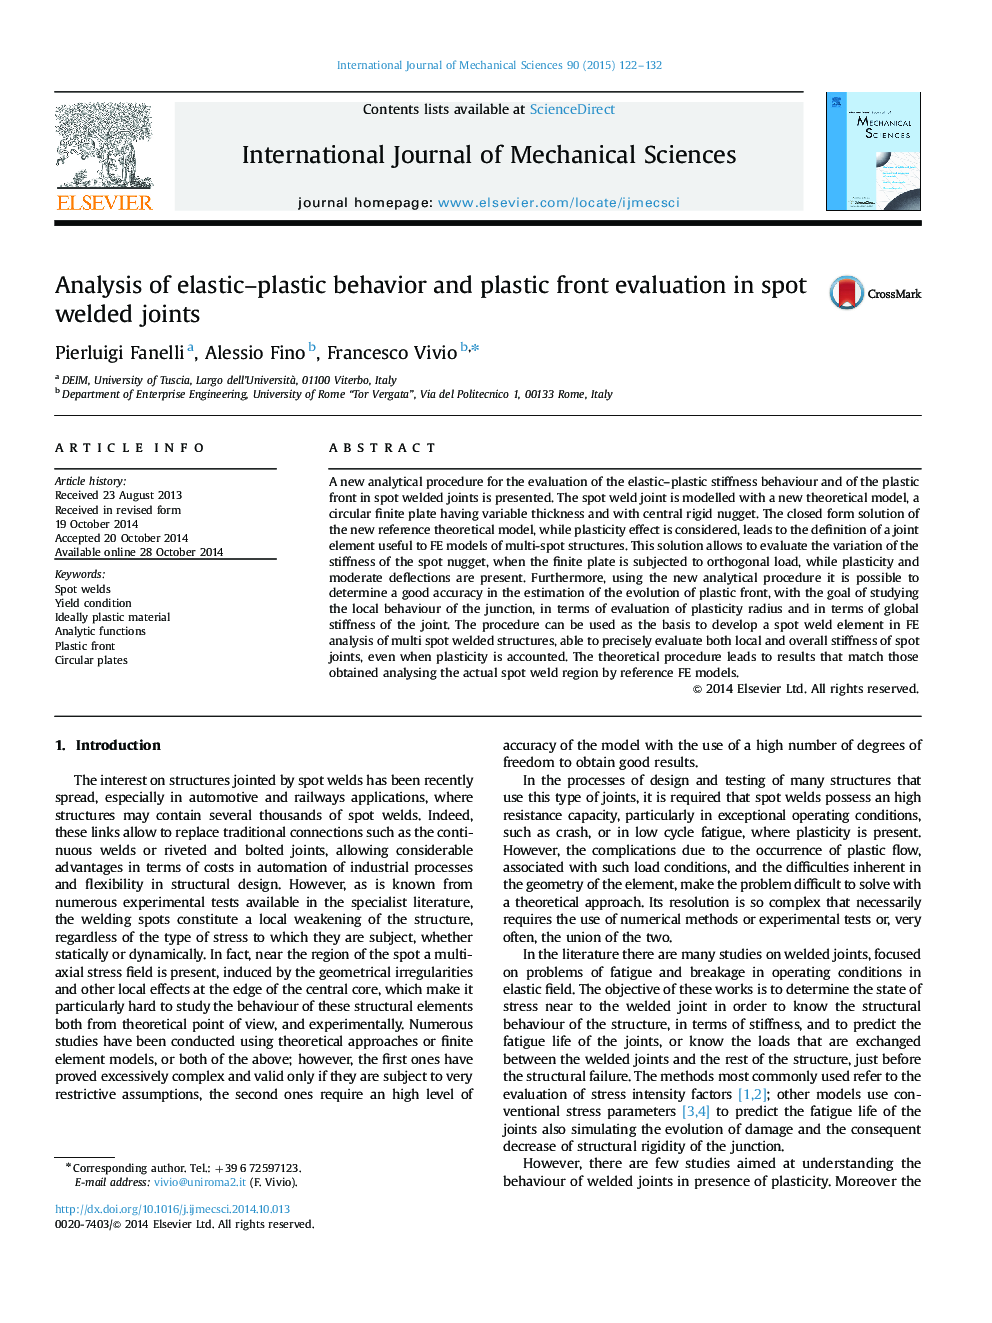 Analysis of elastic–plastic behavior and plastic front evaluation in spot welded joints